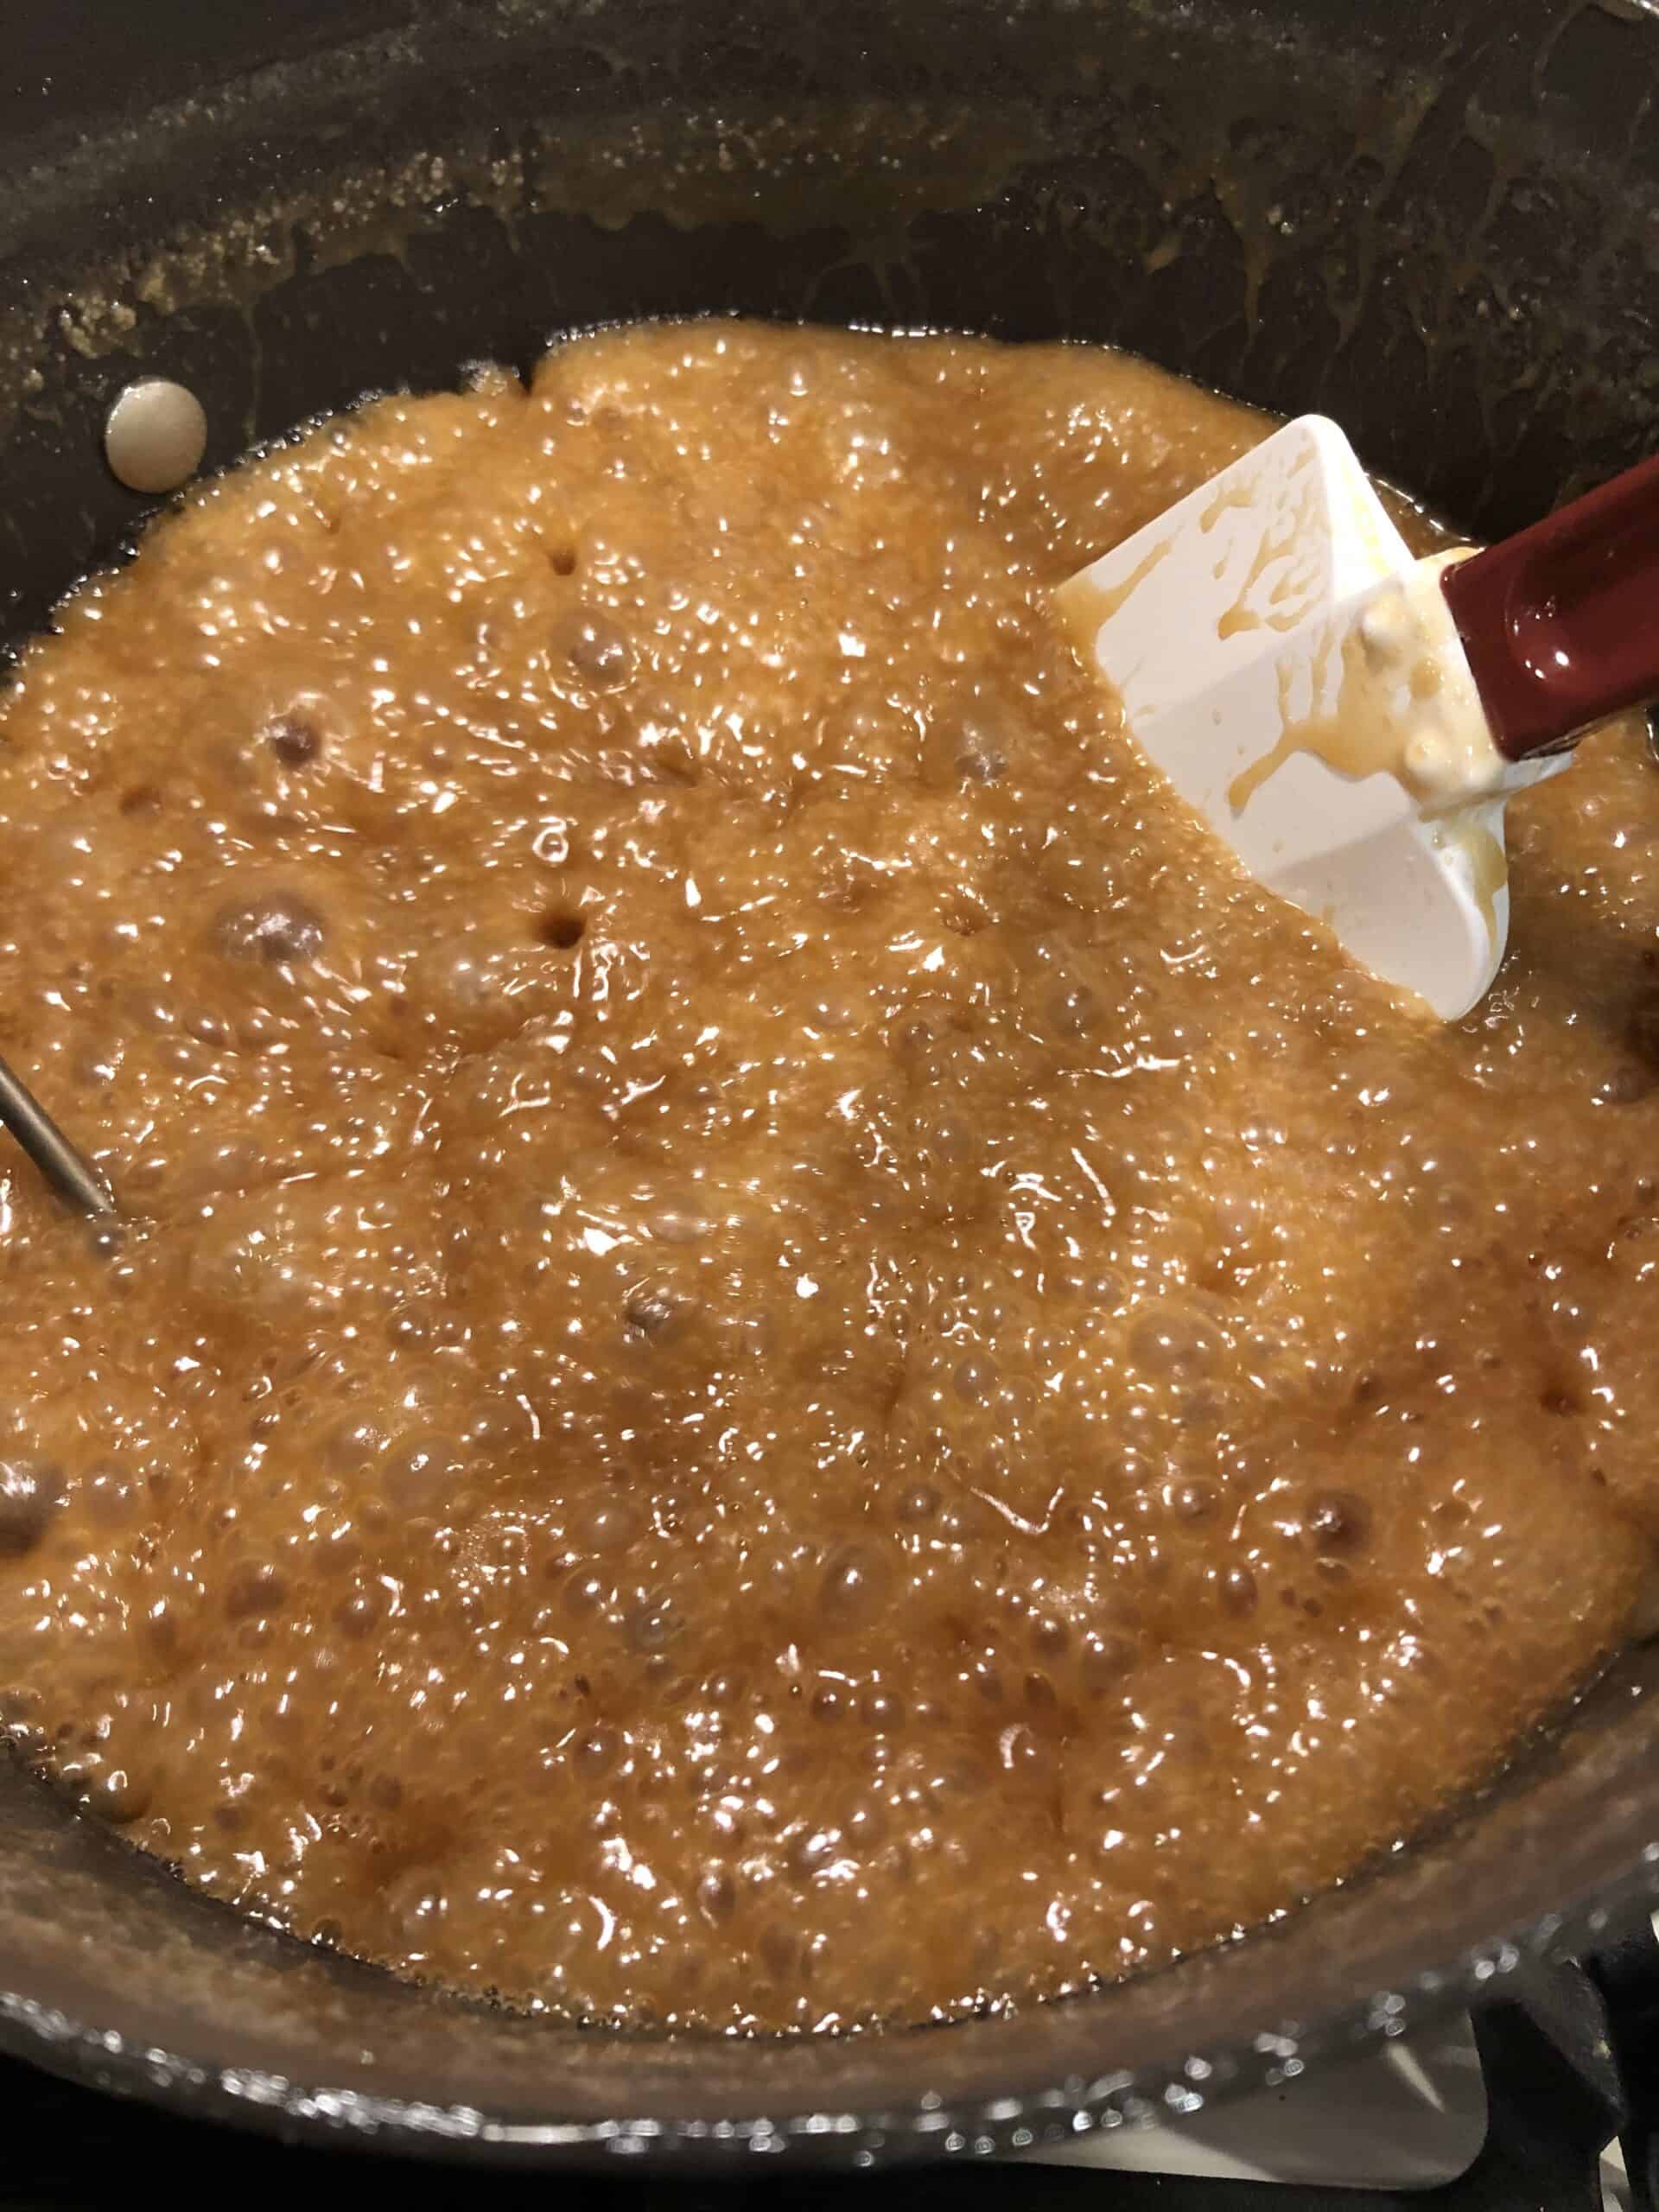 Stage 6 - Continue boiling - caramel color deepens.